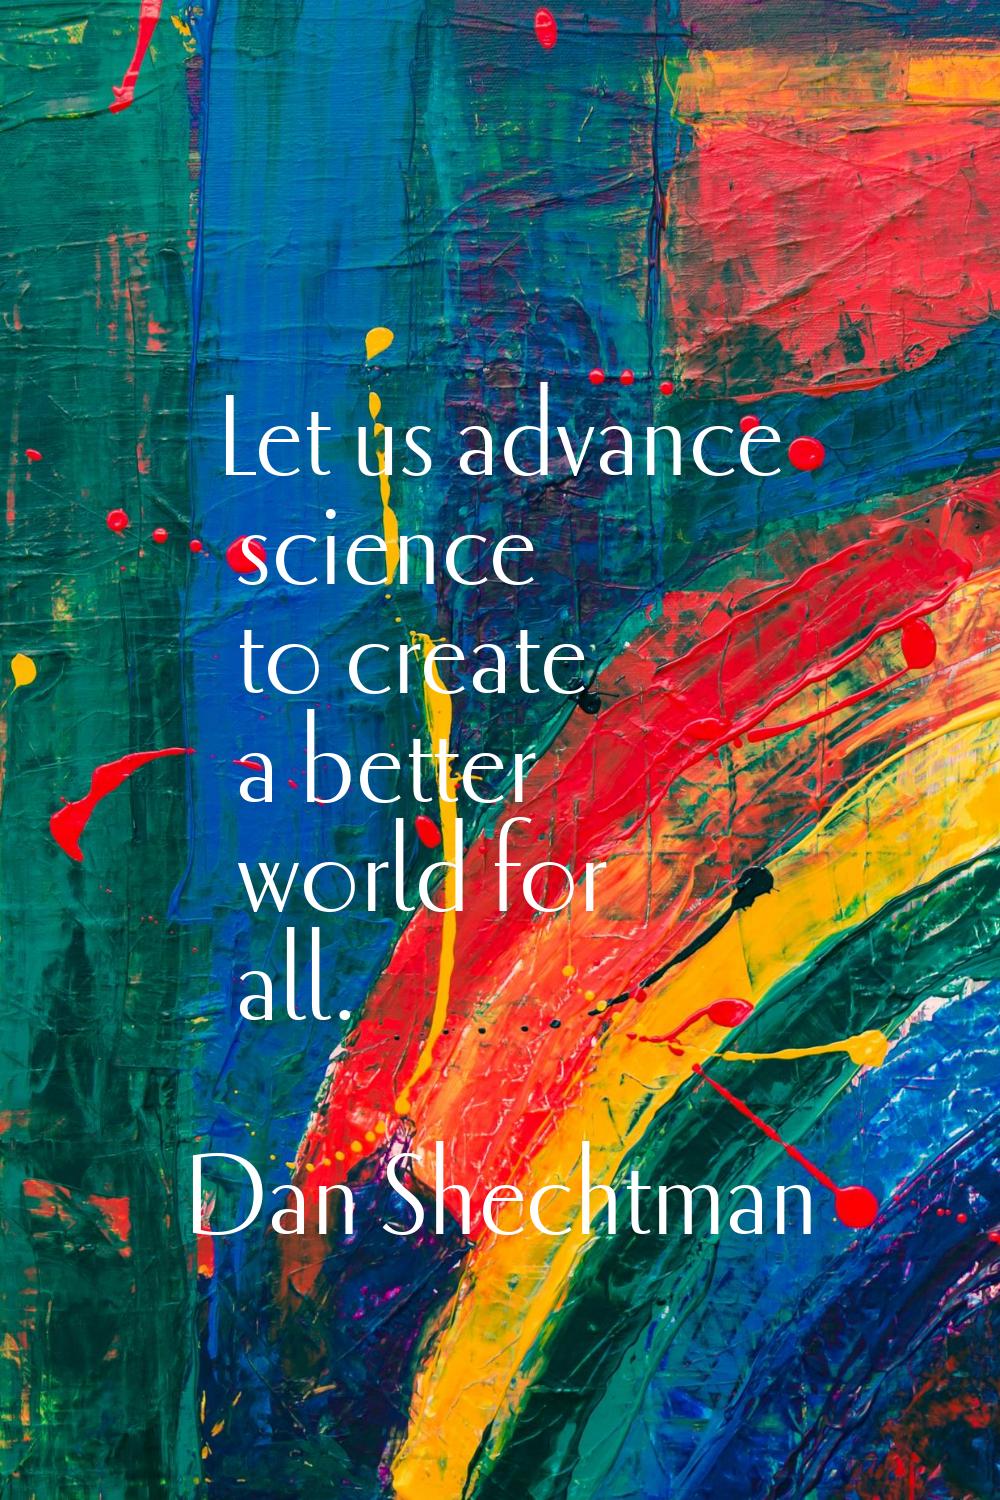 Let us advance science to create a better world for all.